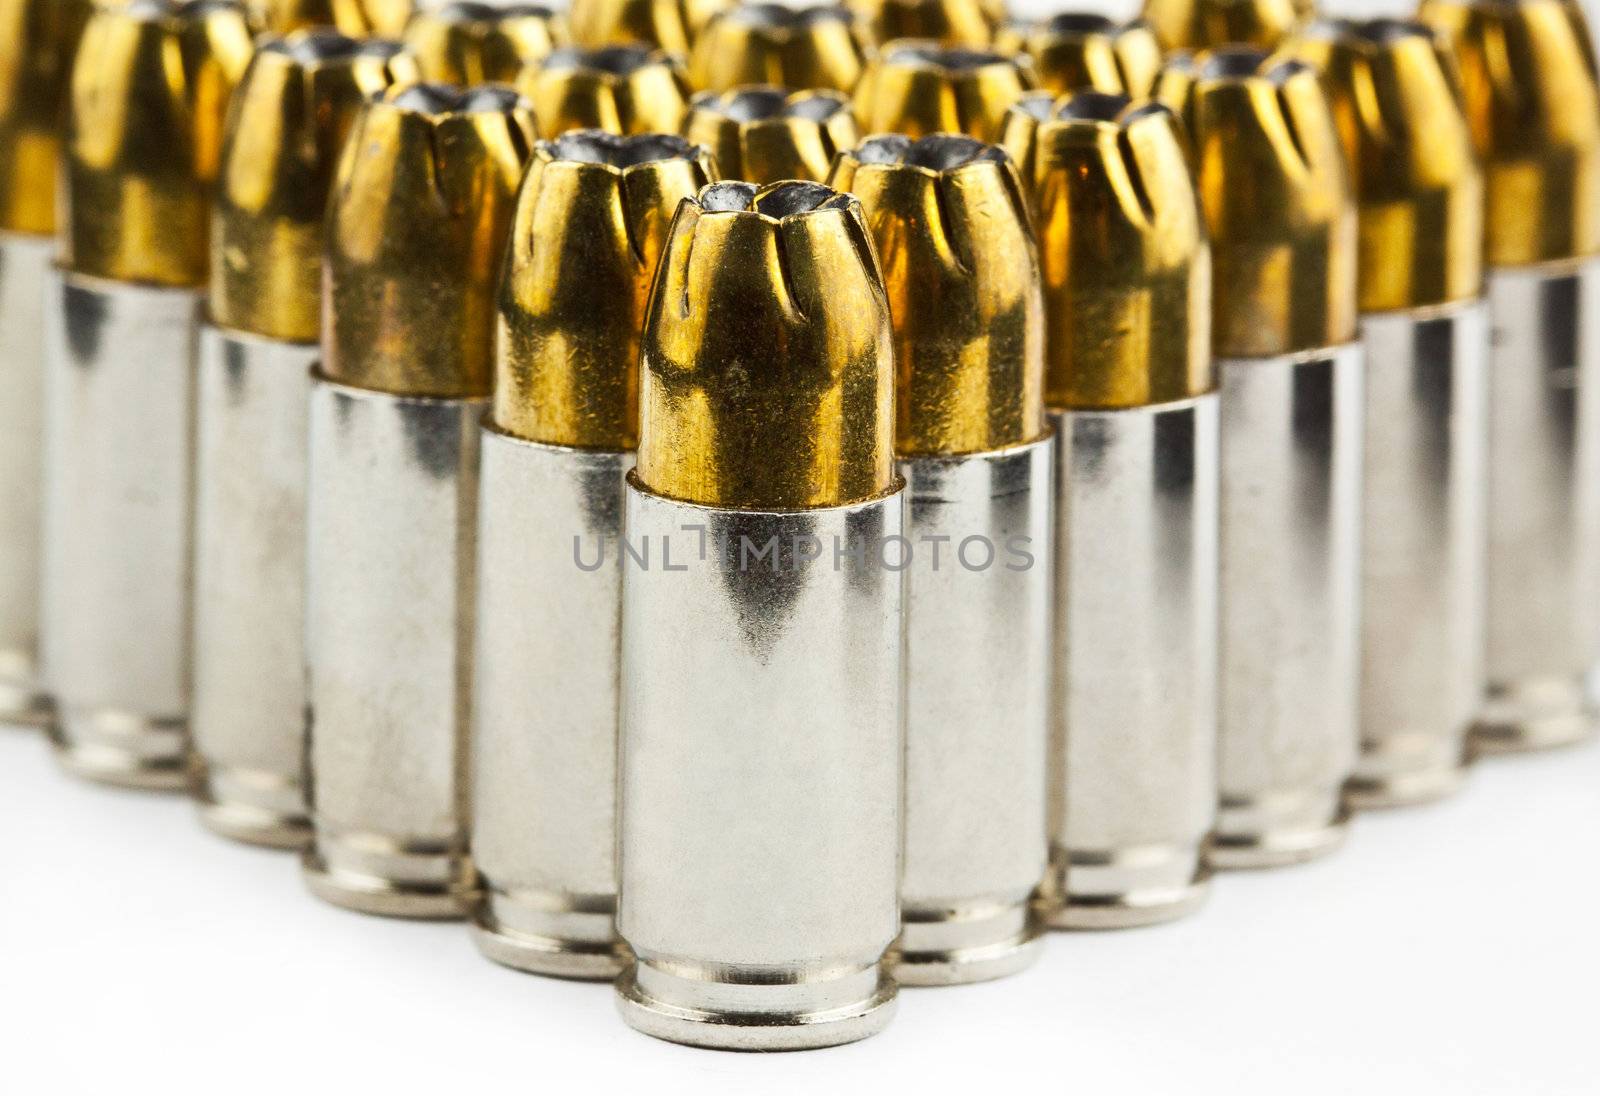 9 mm bullets on a white background isolated